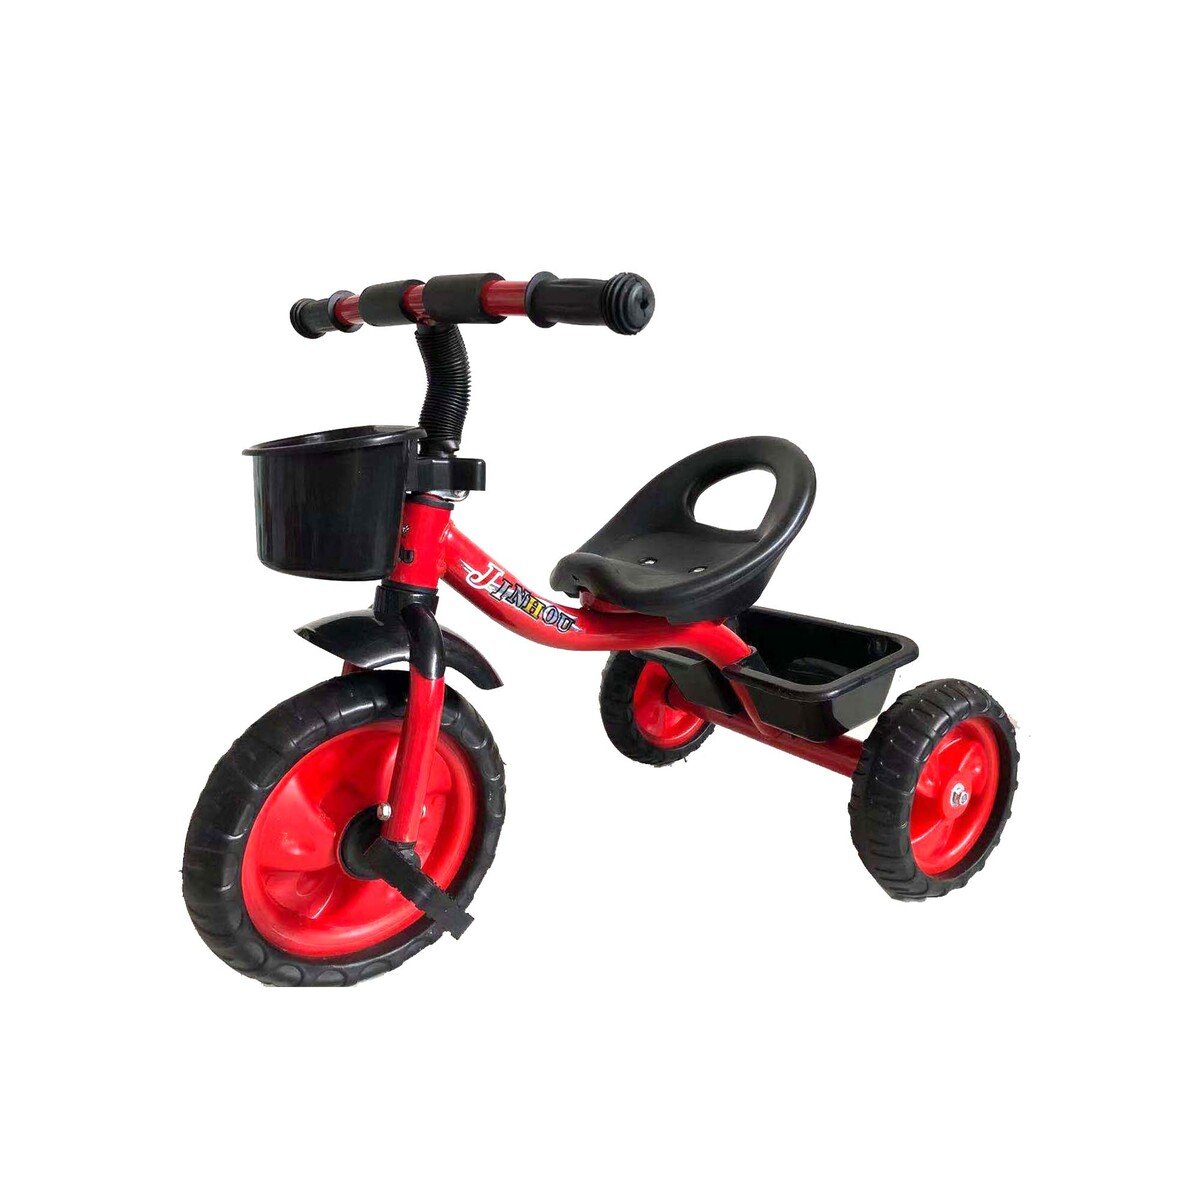 Skid Fusion Kids Tricycle JH-370 Red